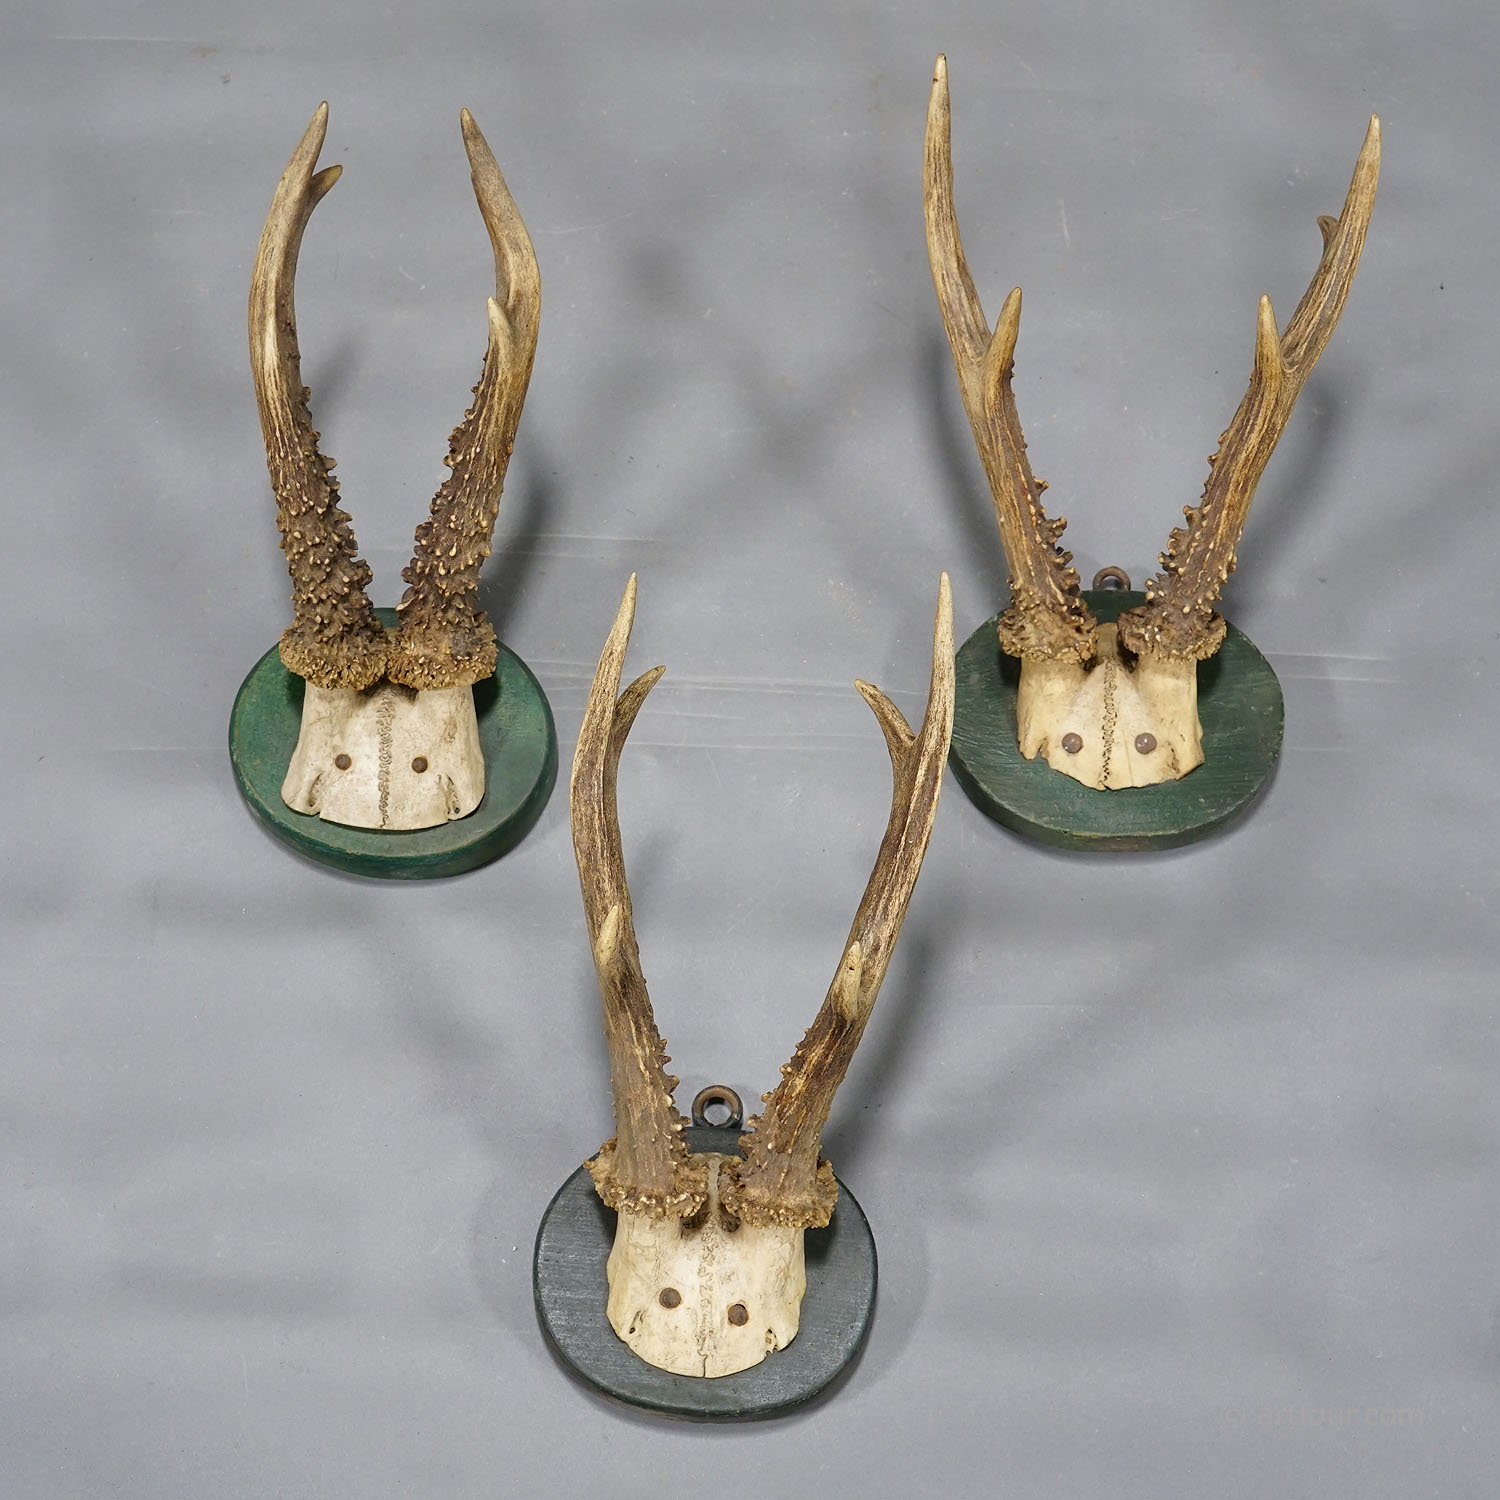 Six Antique Black Forest Deer Trophies on Wooden Plaques Germany 1880s